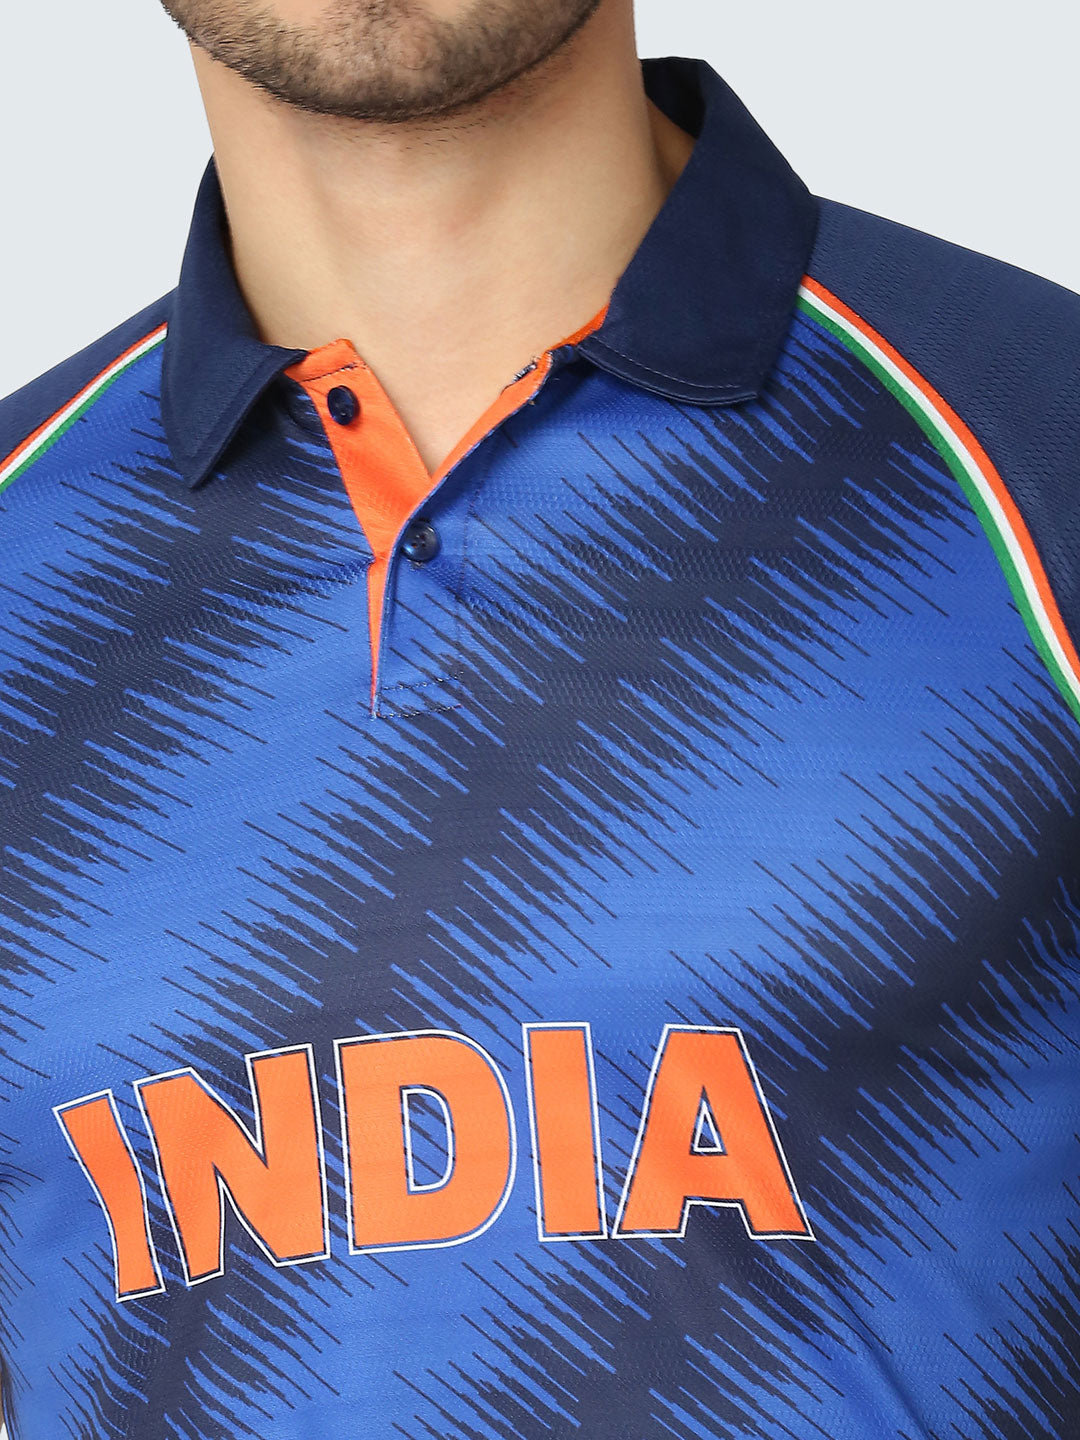 In Pictures: Evolution of India's Cricket Jersey from 1985 to 2017